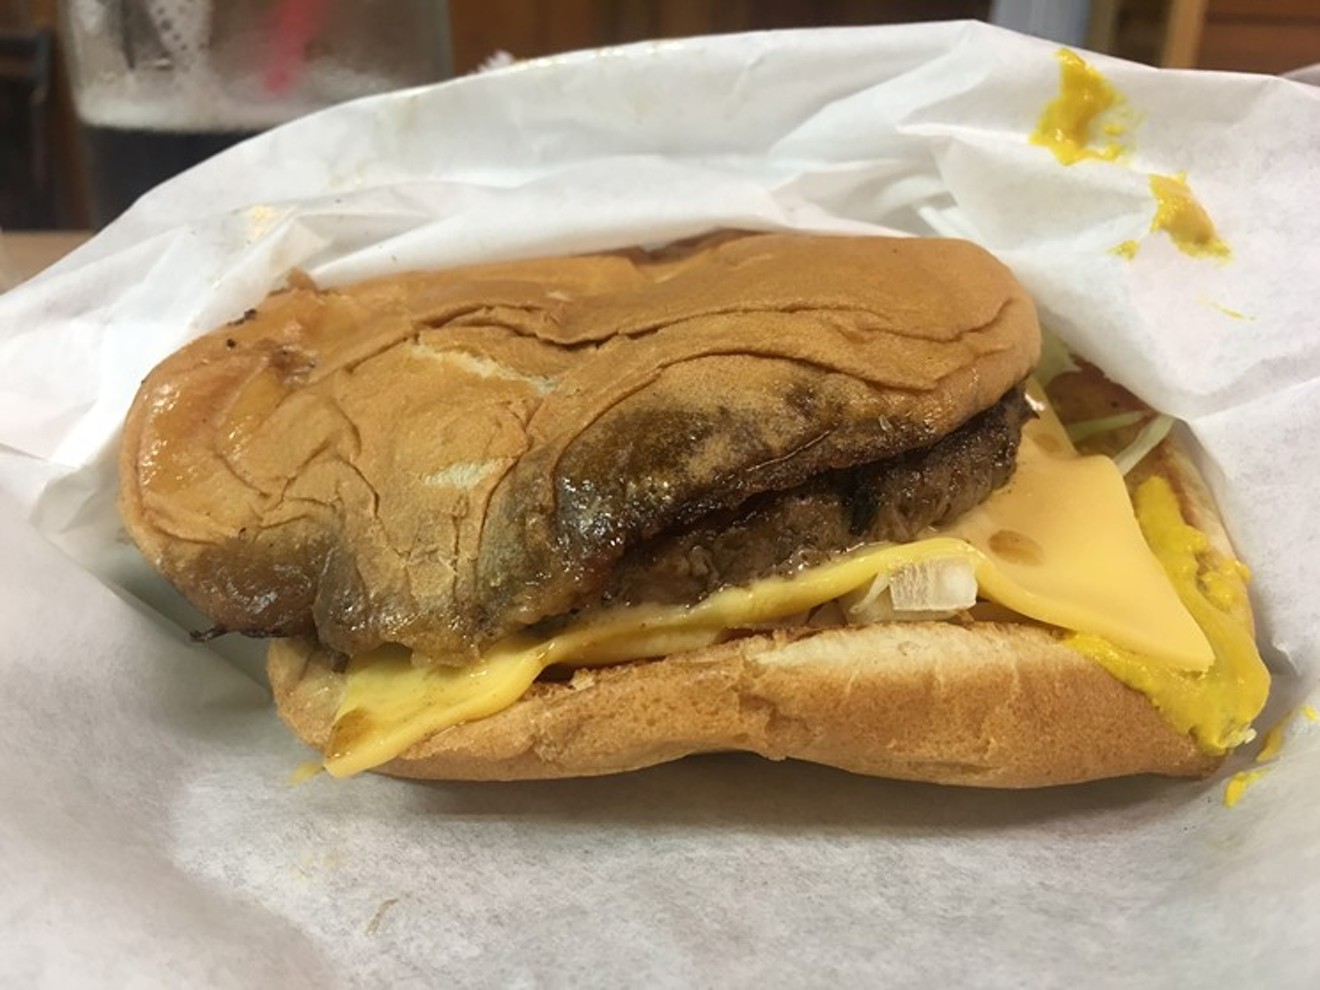 In the Instagrammable food era, Dairy-Ette could care less about being photogenic — and that's just one reason why, after 61 years, they still make one of the best cheap burgers in Dallas.